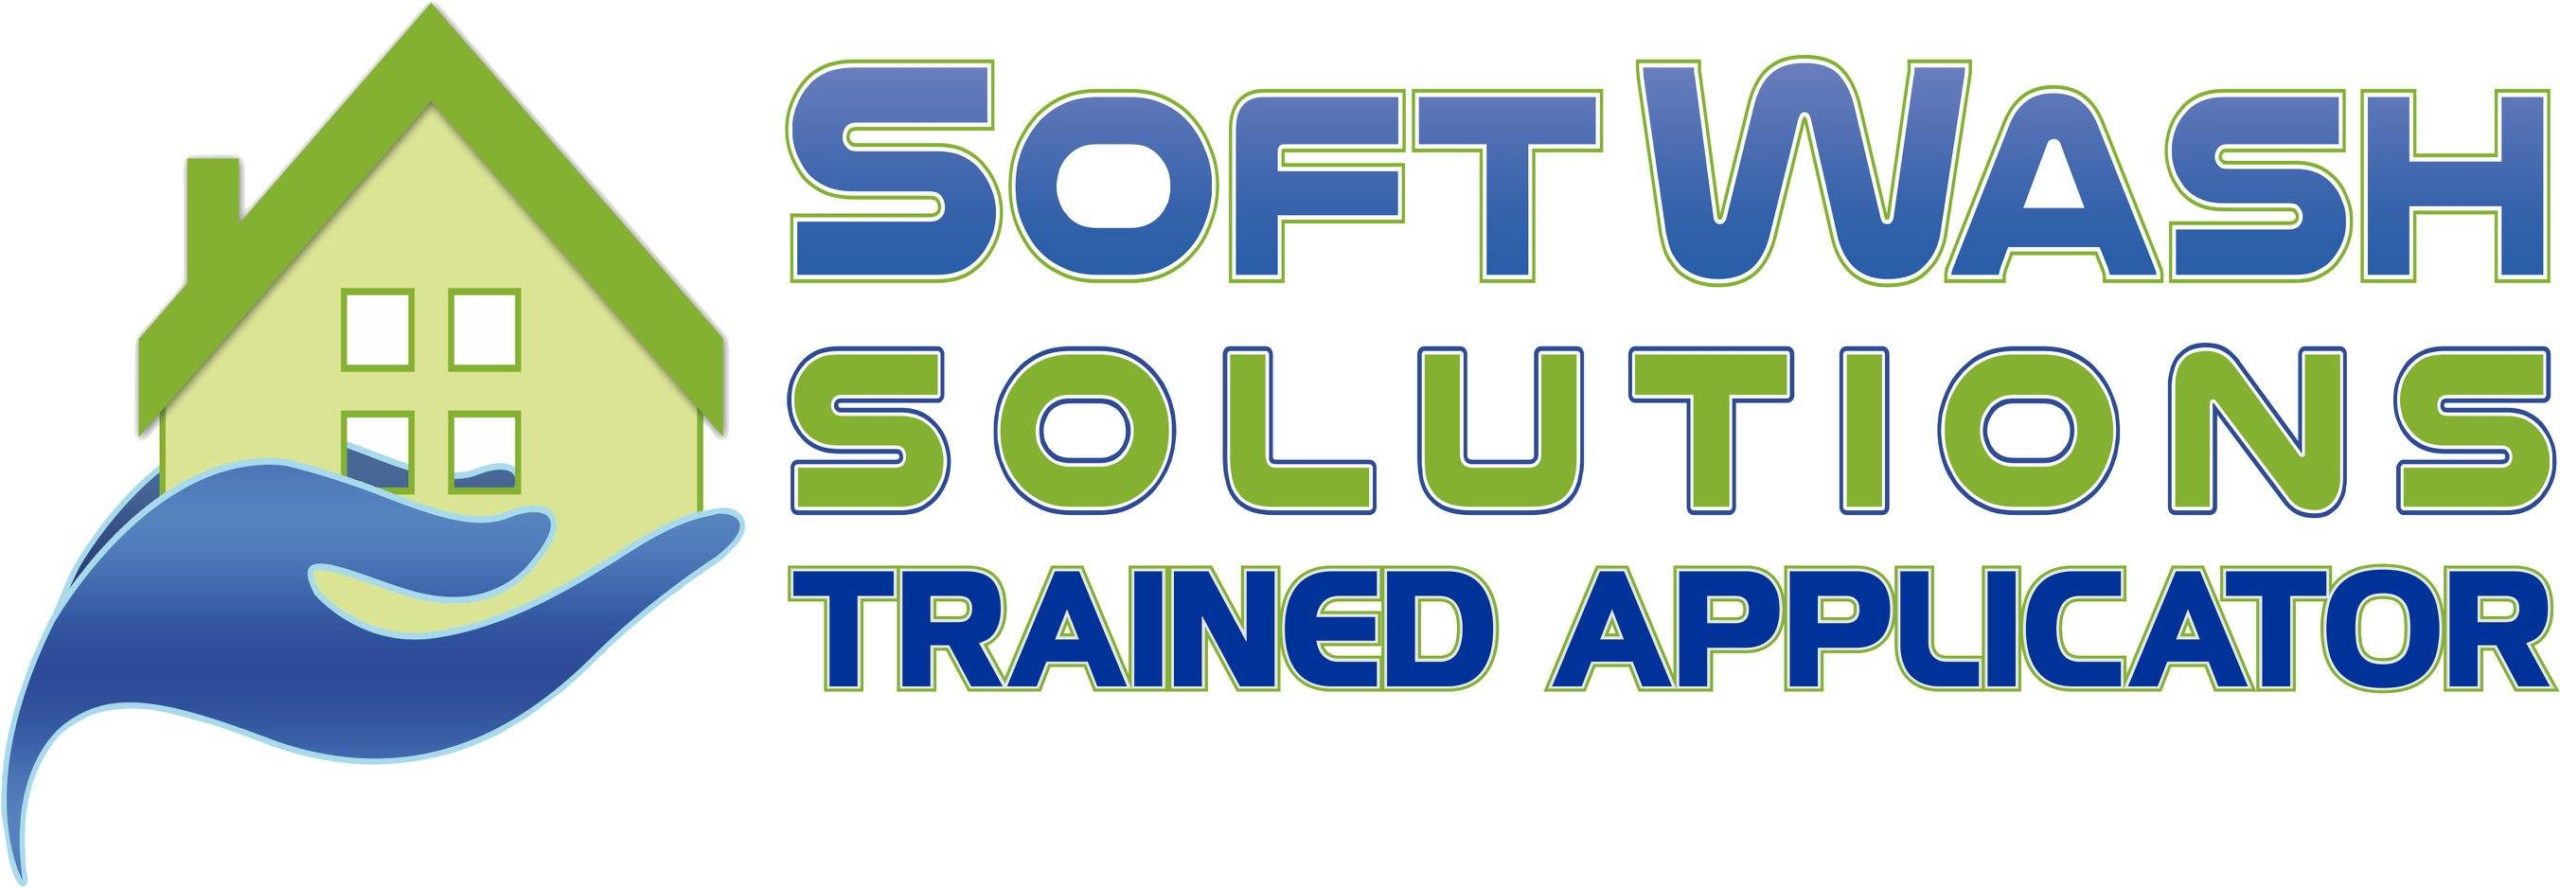 softwash solutions trained